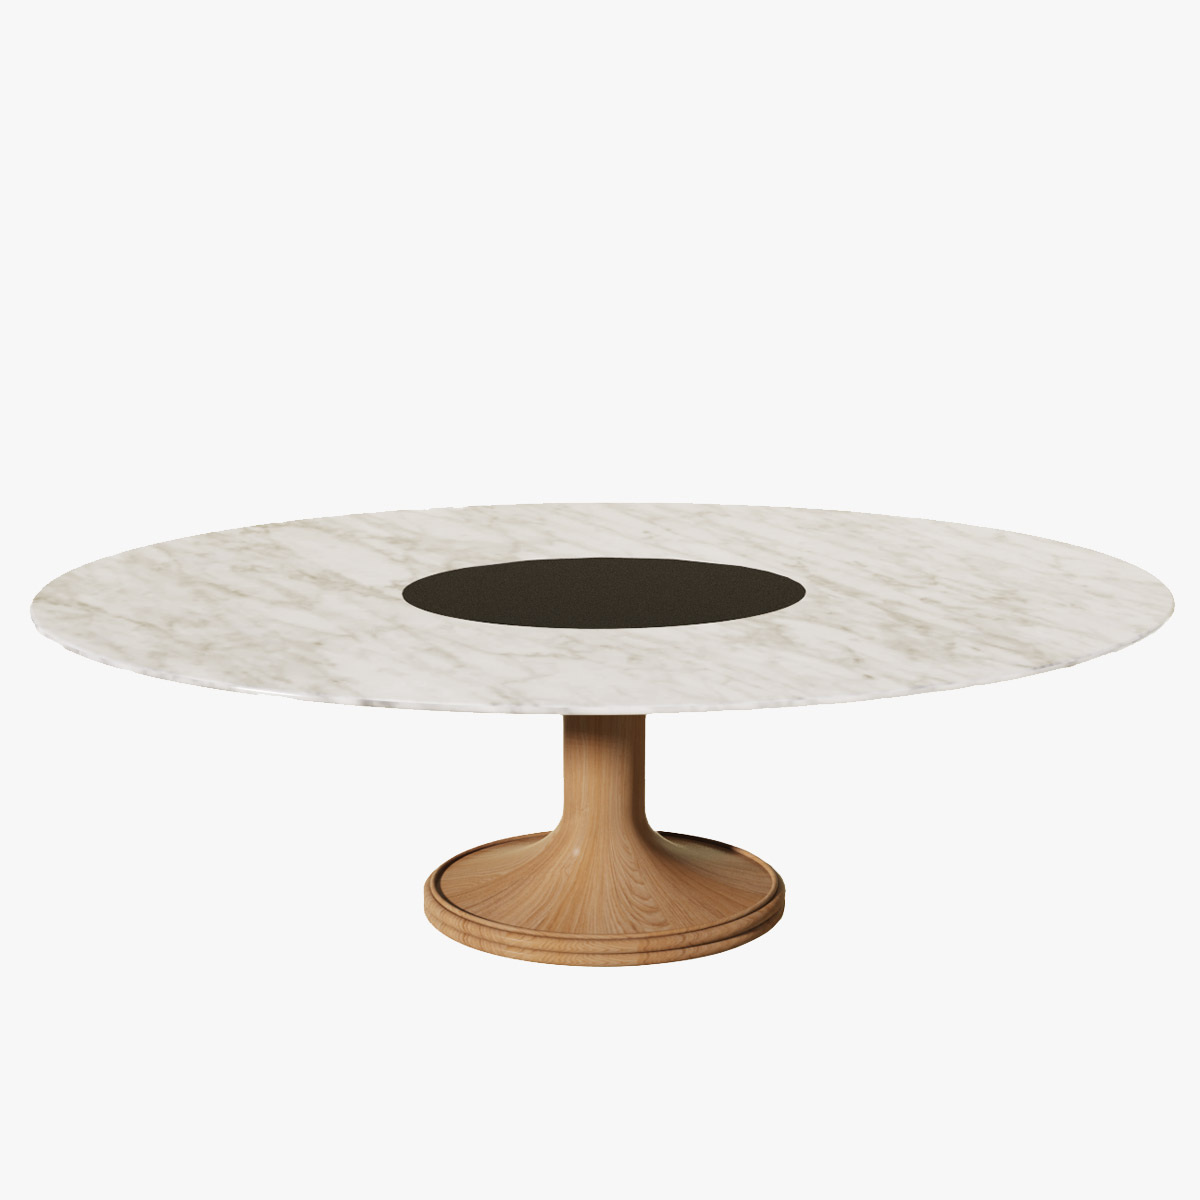 Round Dining Table Riviera, White / Natural - ø240 x H74 cm - Carrara marble / Rattan - image 1